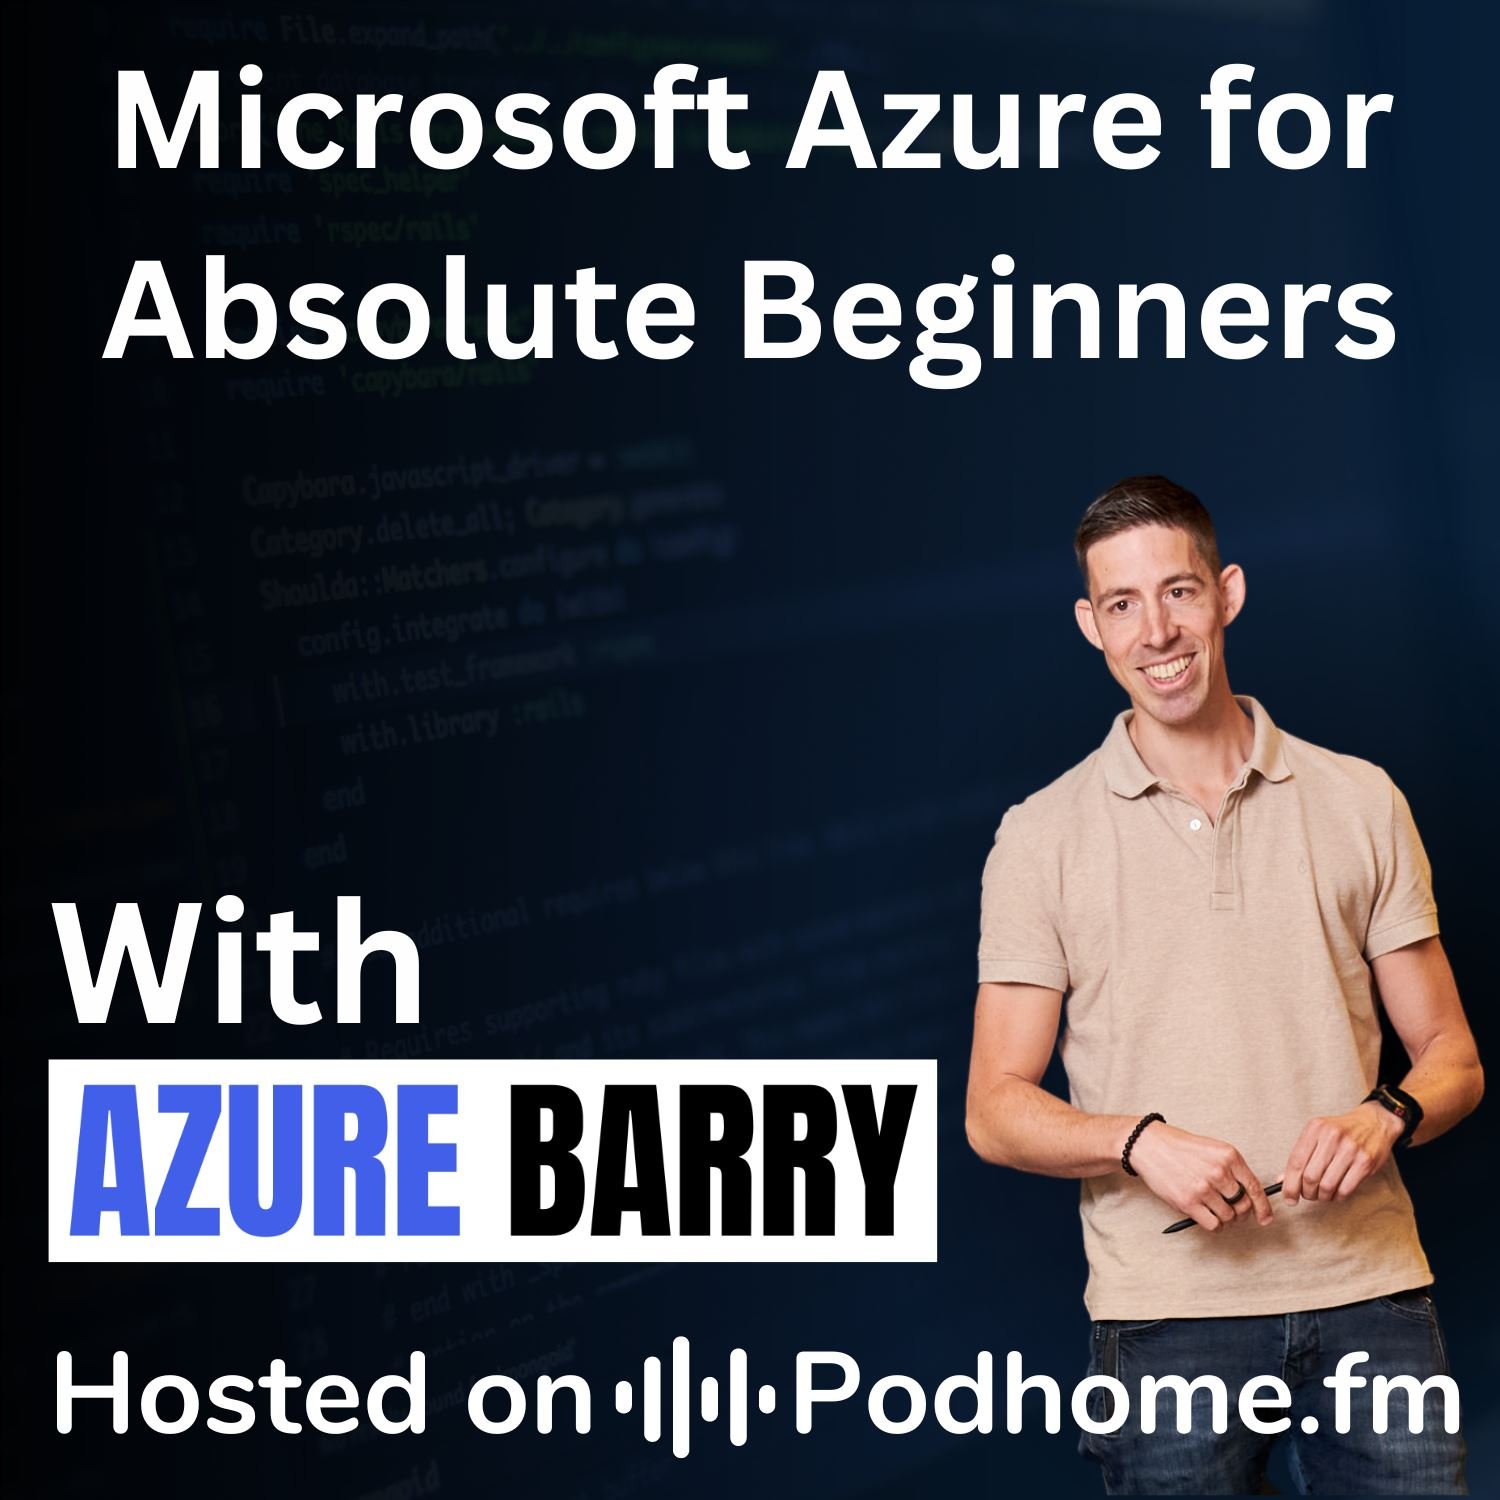 Microsoft Azure for Absolute Beginners